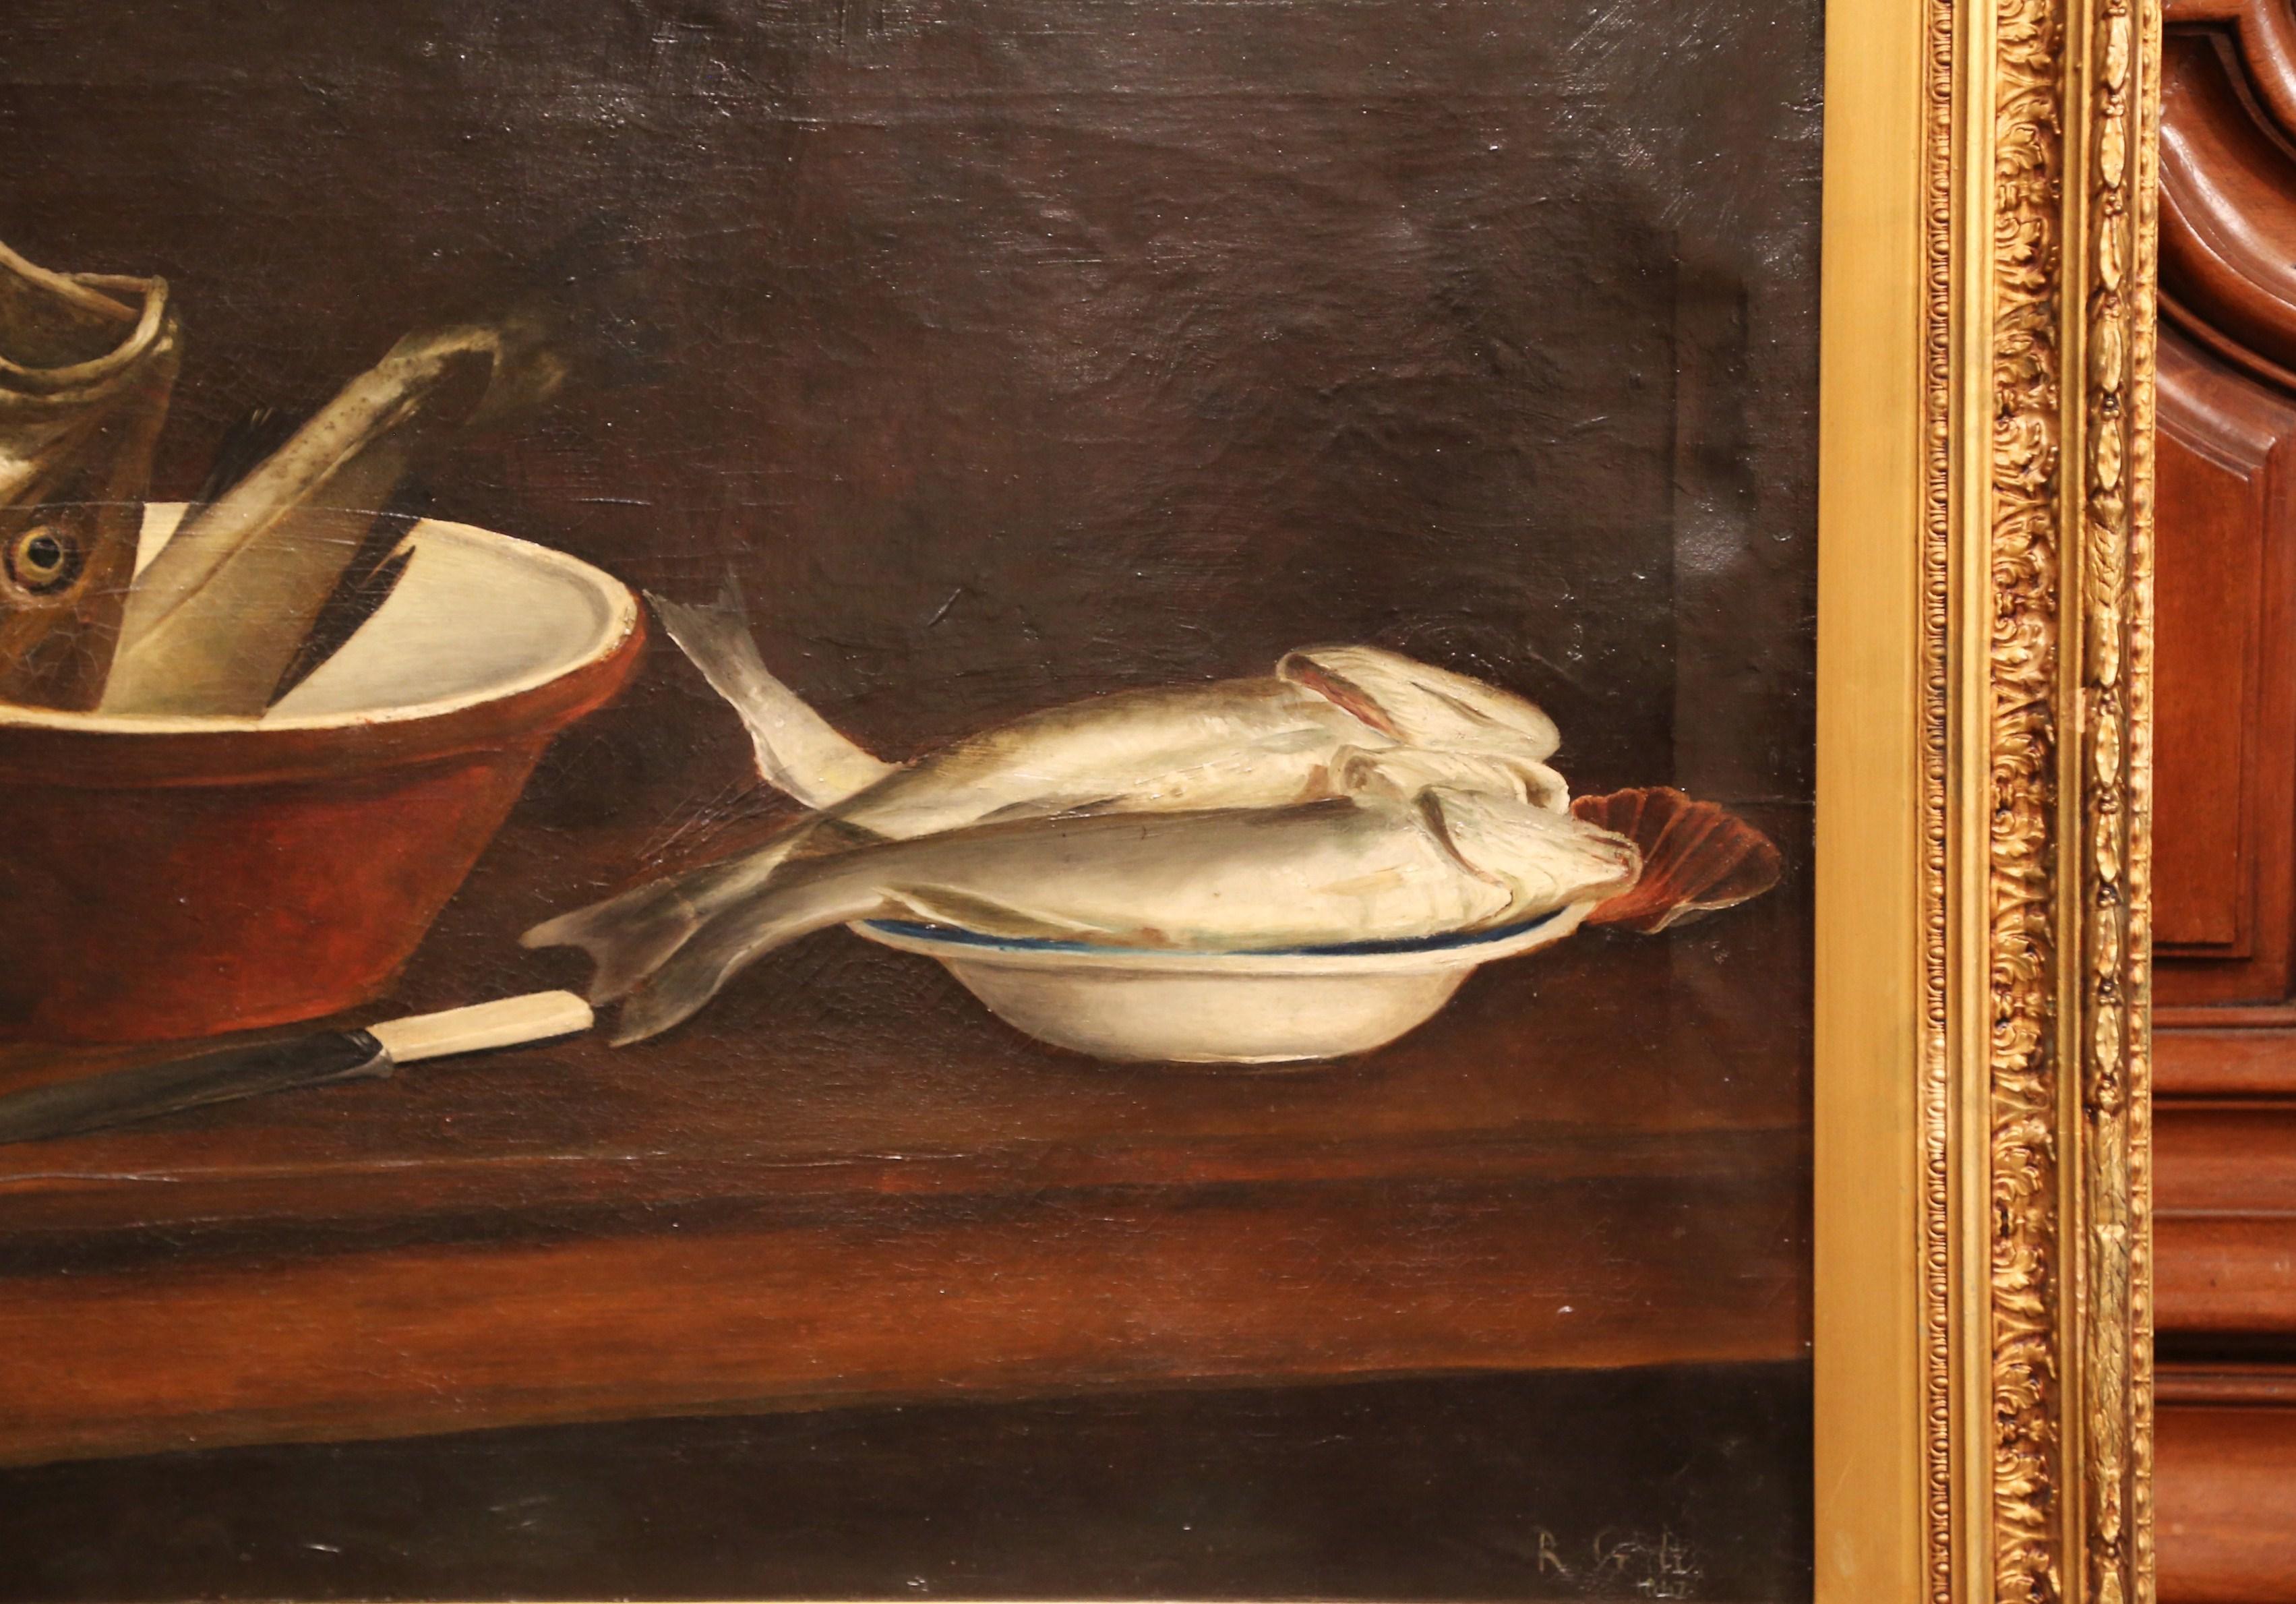 This antique, kitchen still life painting was painted in England in the 19th century. Signed on the bottom left corner and dated 1847, the canvas is set in its original carved gilt wood frame. The composition features two pots with fish that are